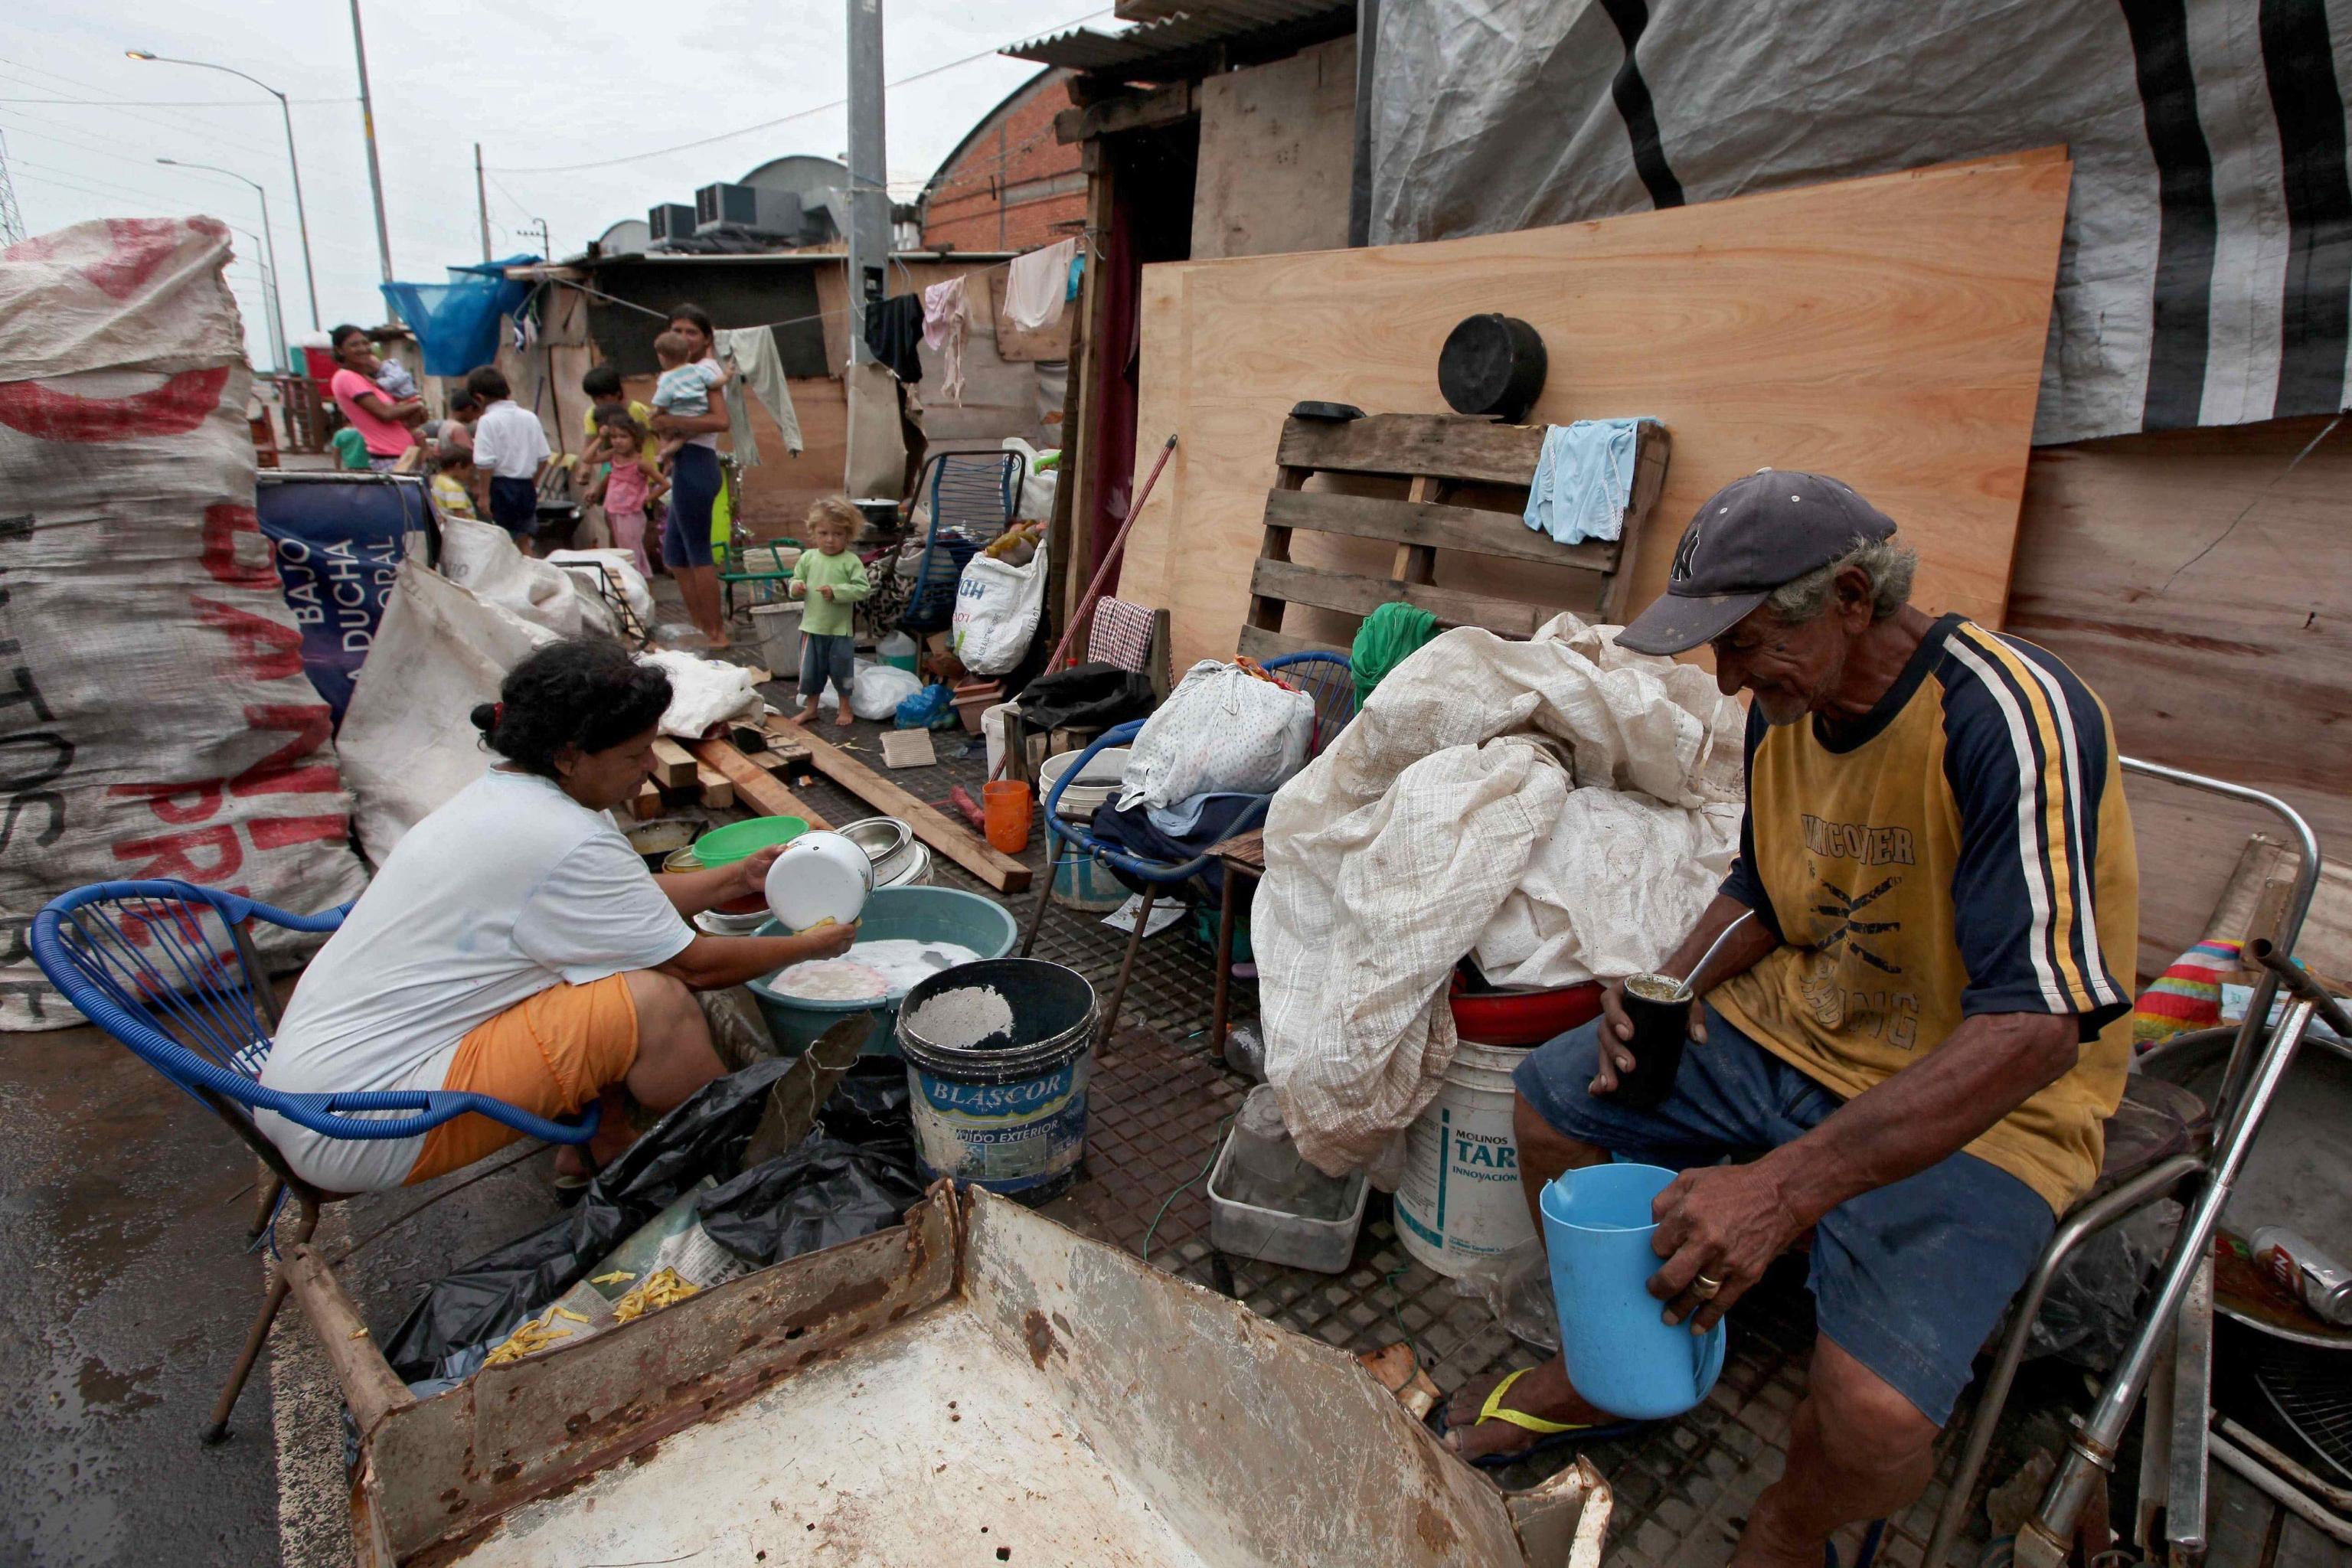 A family sits in a temporary shelter for affected people in Asuncion